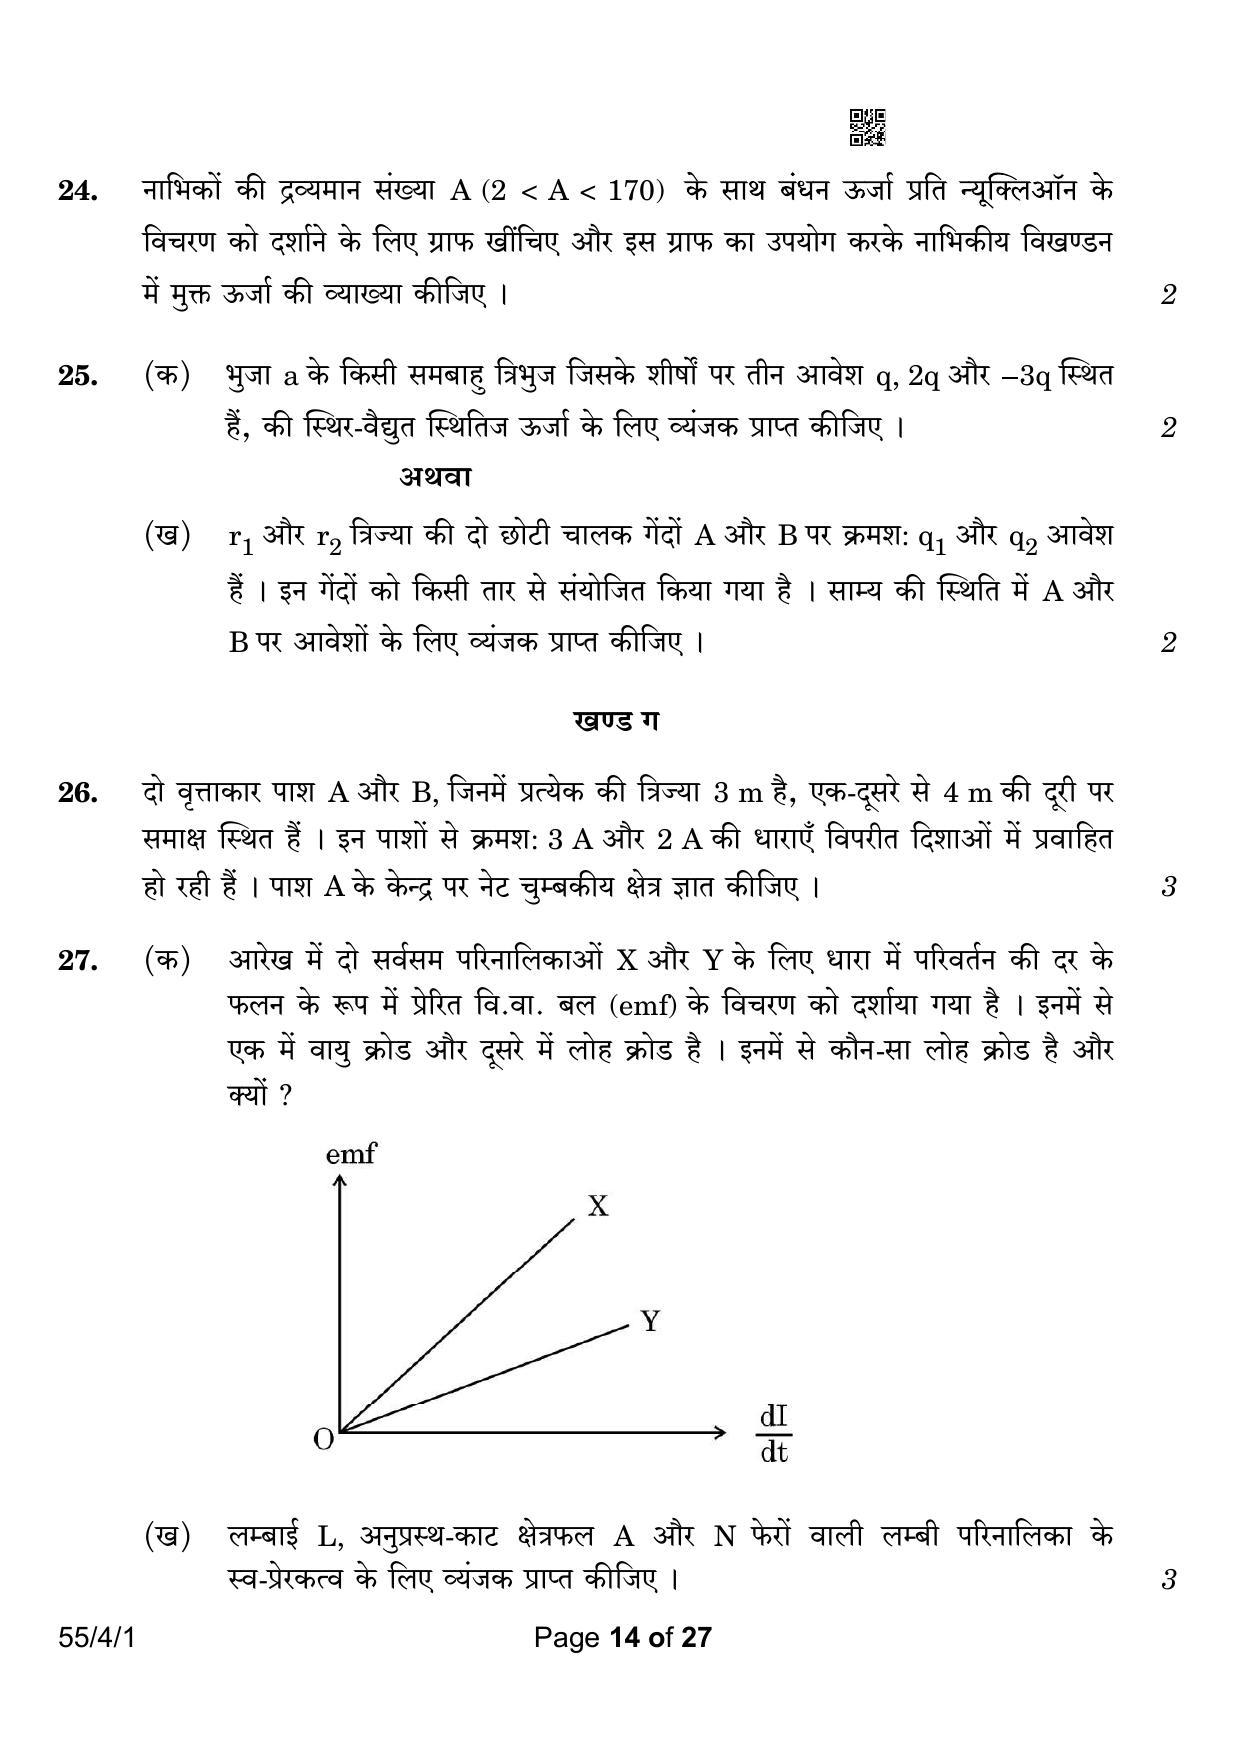 CBSE Class 12 55-4-1 Physics 2023 Question Paper - Page 14